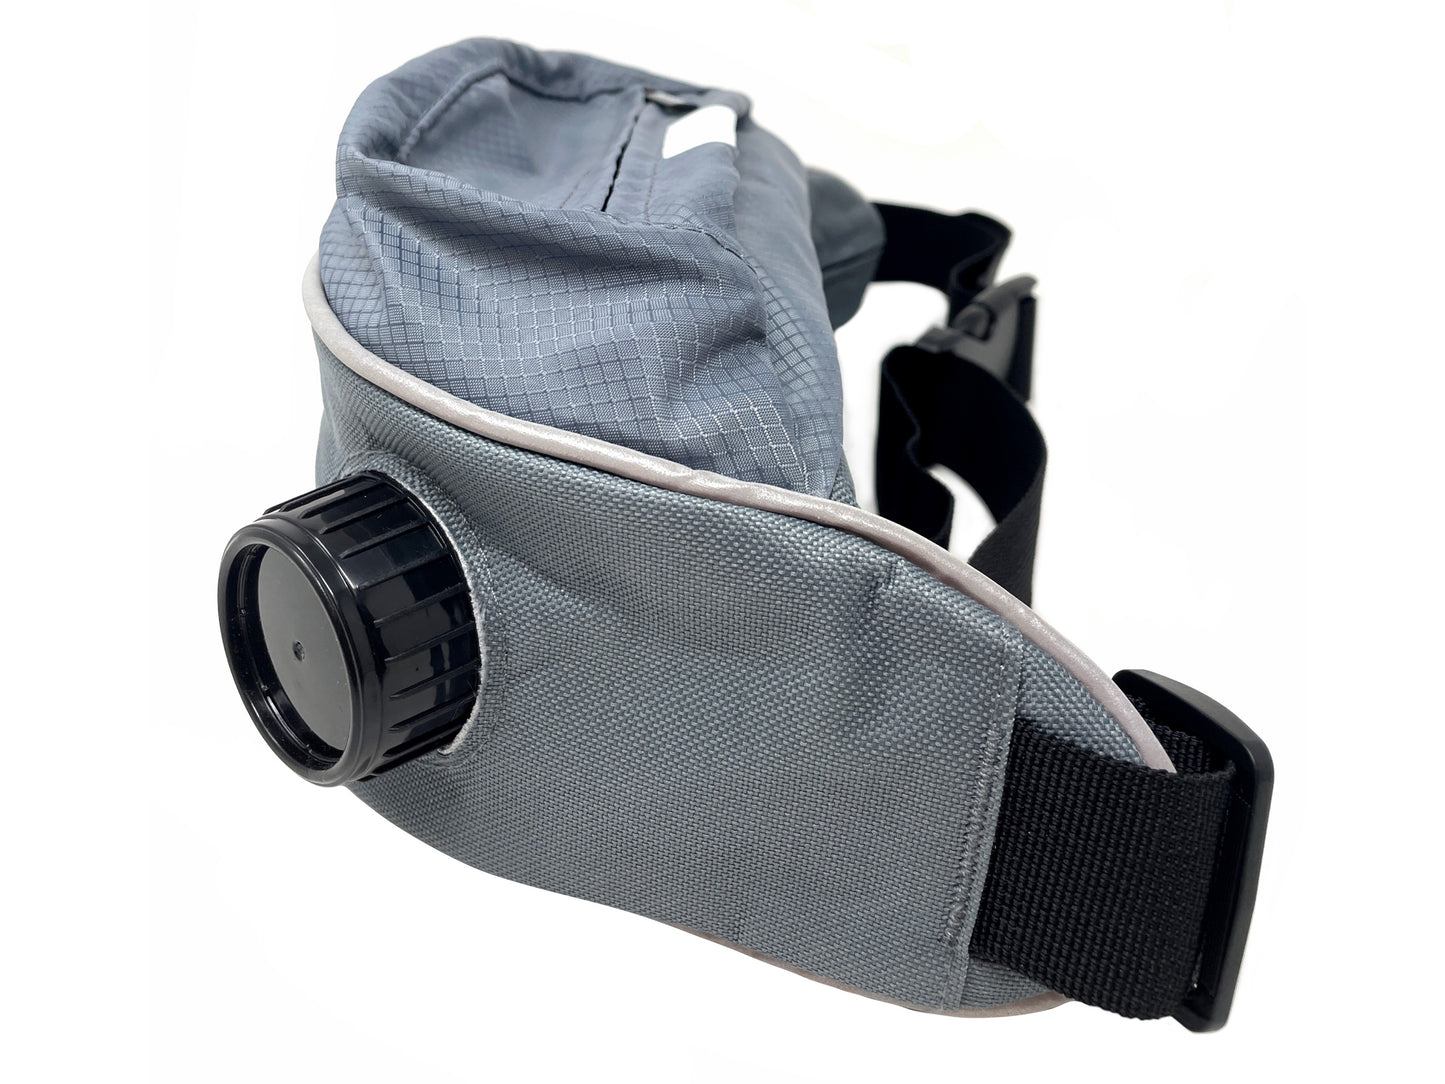 BACKPACK-05 Multifunction Thermic Sports Bottle Waist Bag